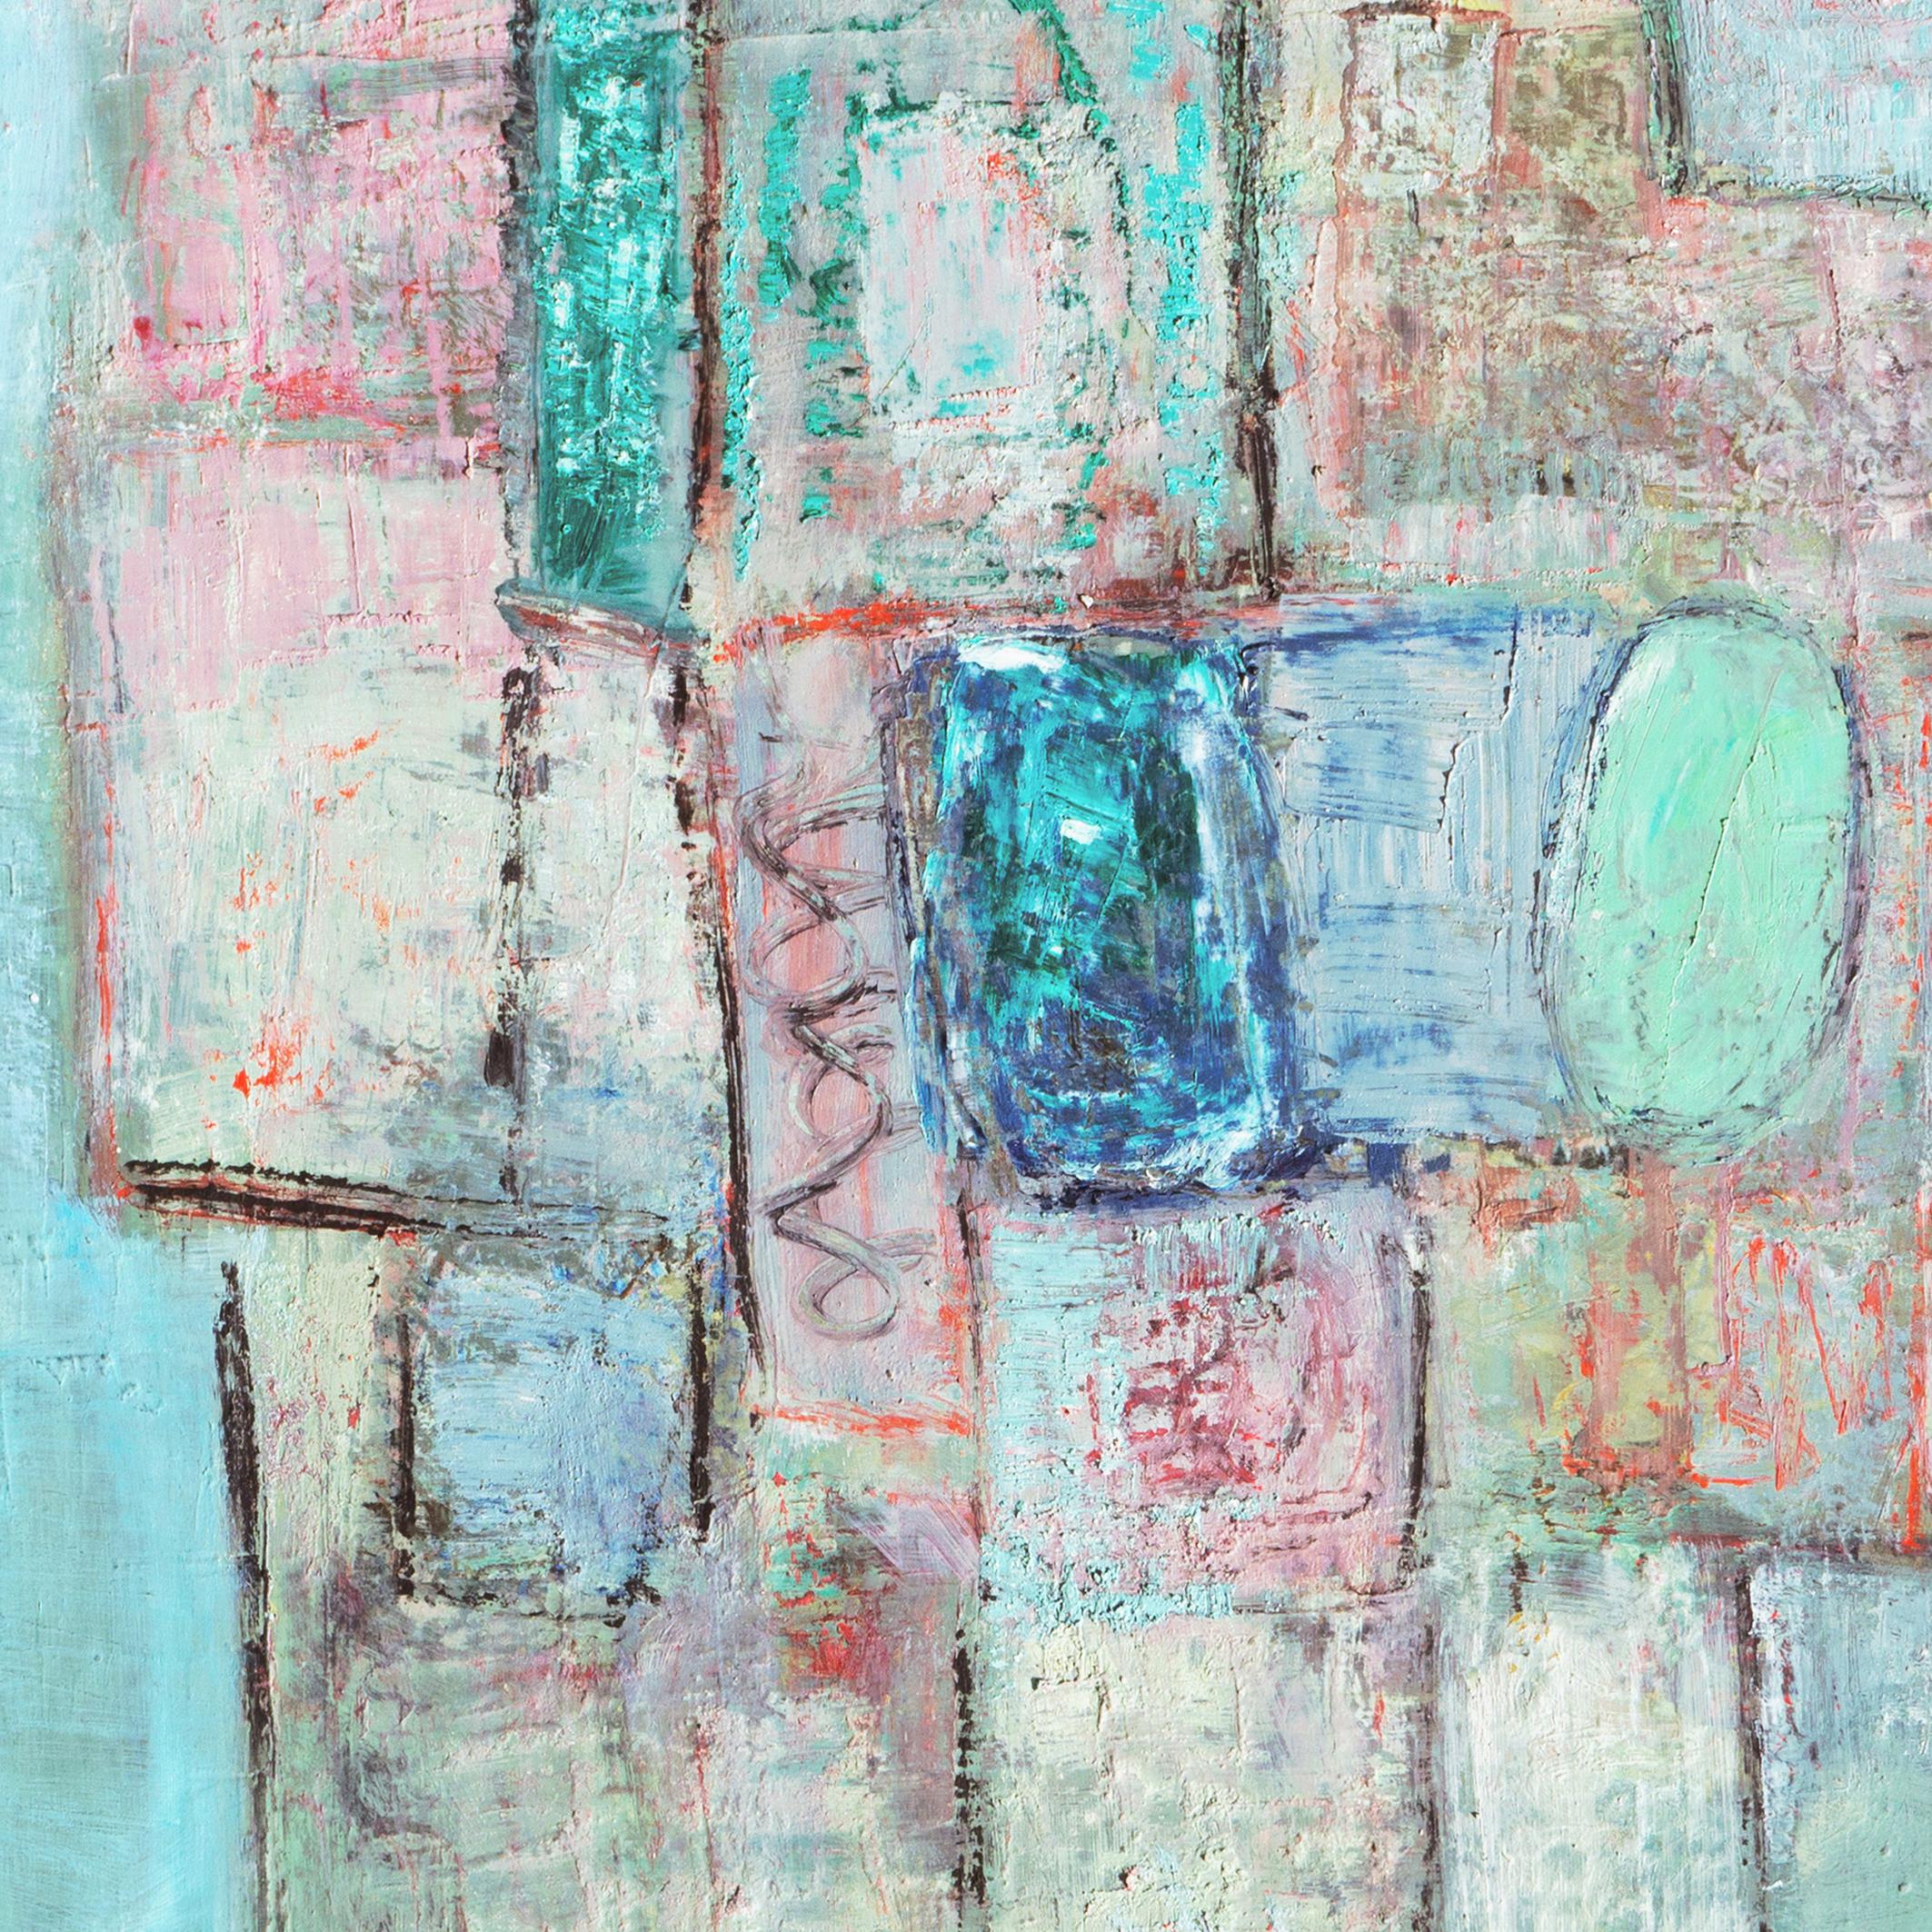 'Abstract, Turquoise and Rose', Paris Modernist, Guggenheim, Benezit, Italy 1